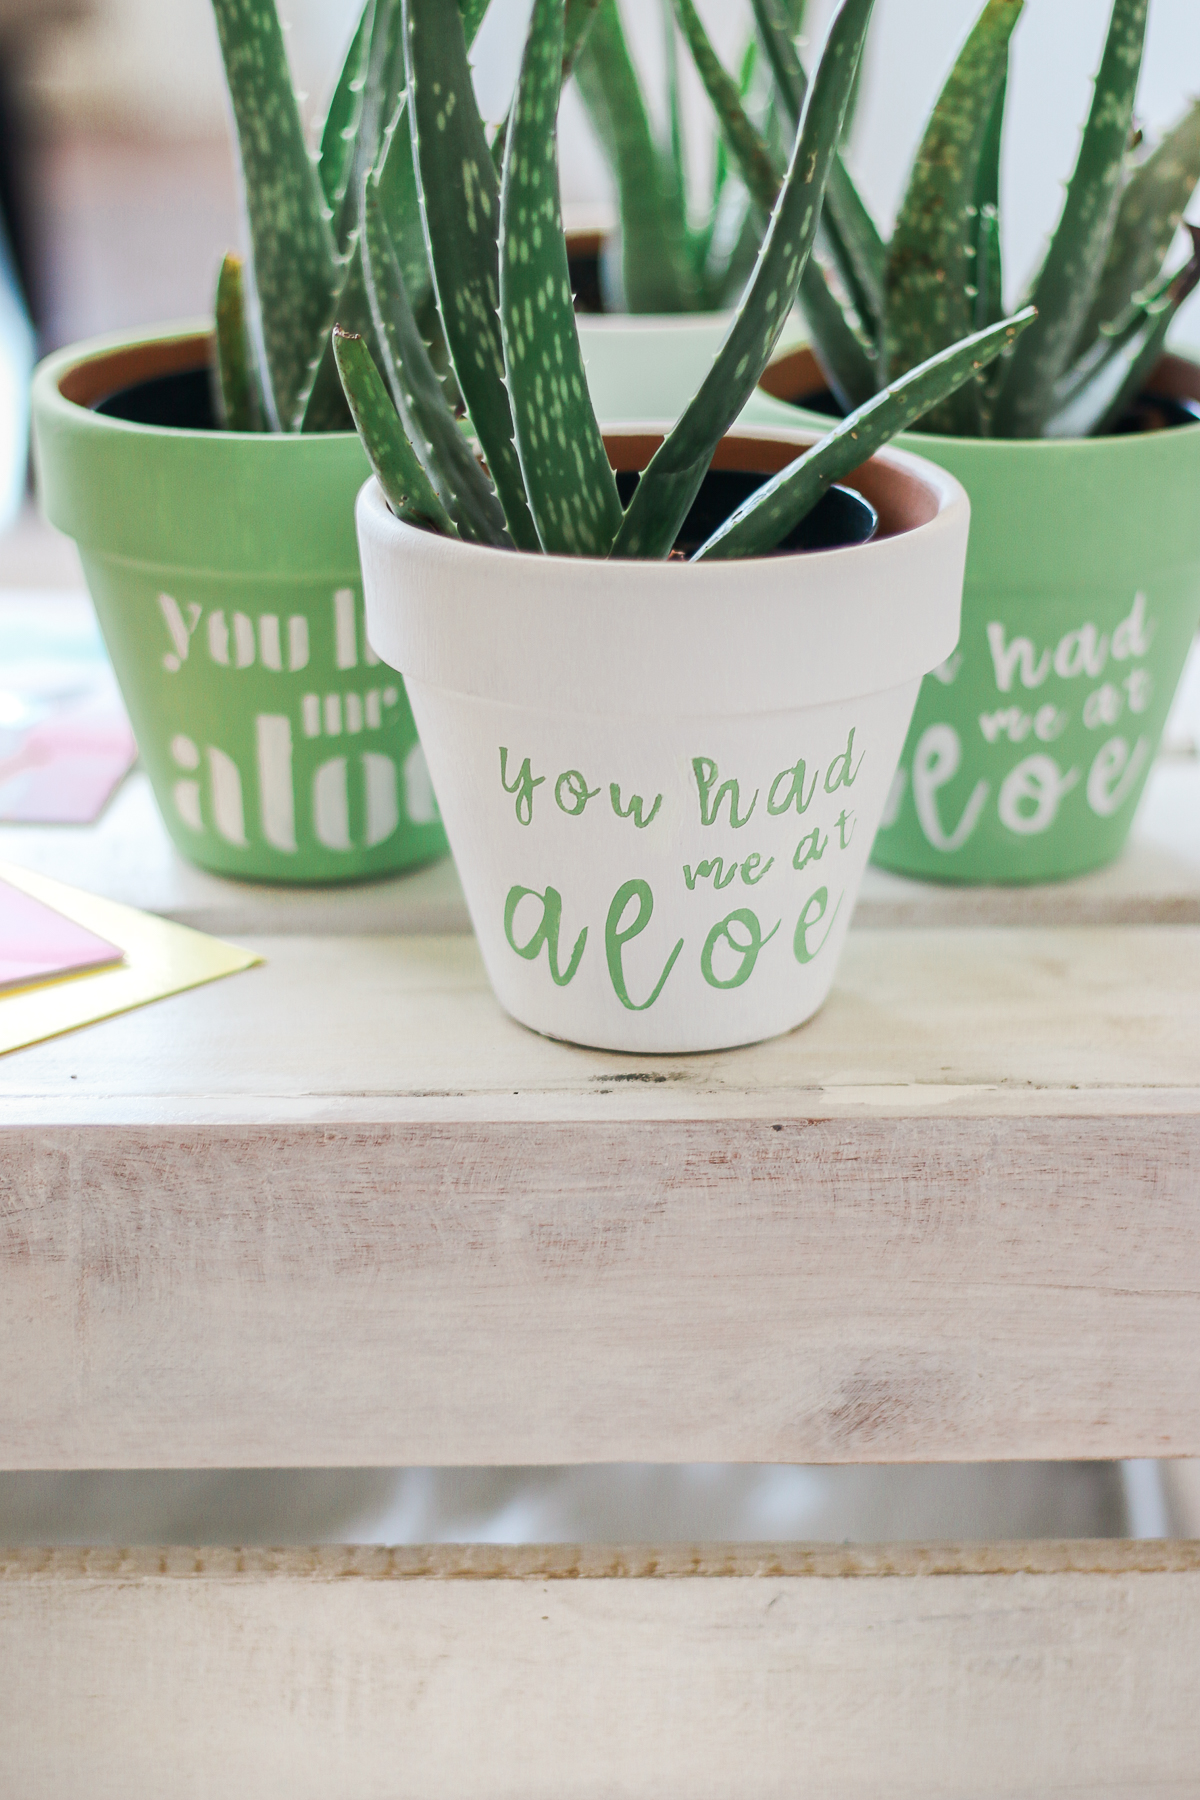 "You Had Me at Aloe" DIY succulent planter by southern blogger Stephanie Ziajka from Diary of a Debutante, gift idea for new neighbors, easy clay pot craft ideas, terracotta ideas, cute aloe vera planter, American Greetings featured artists cards